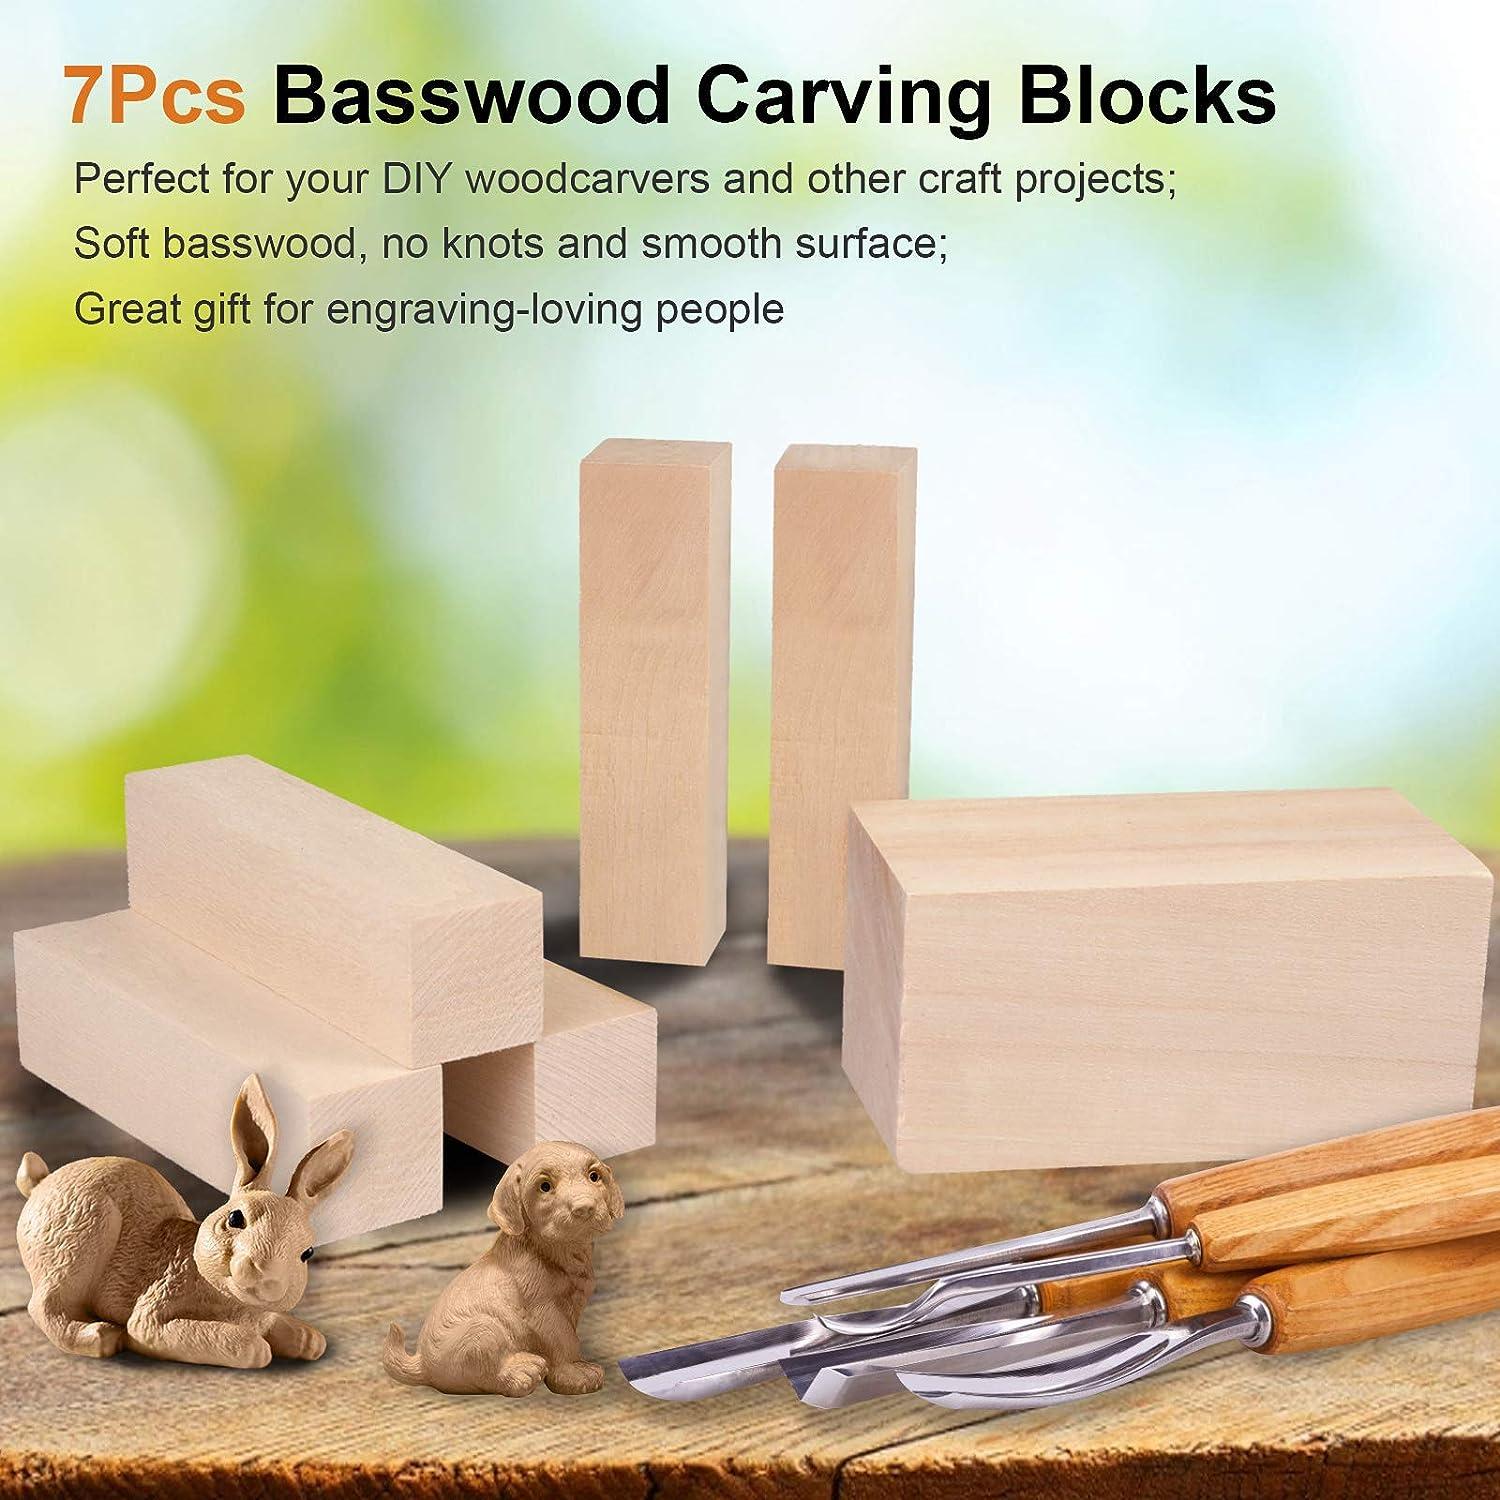 Basswood Carving Blocks, Basswood Carving Wood